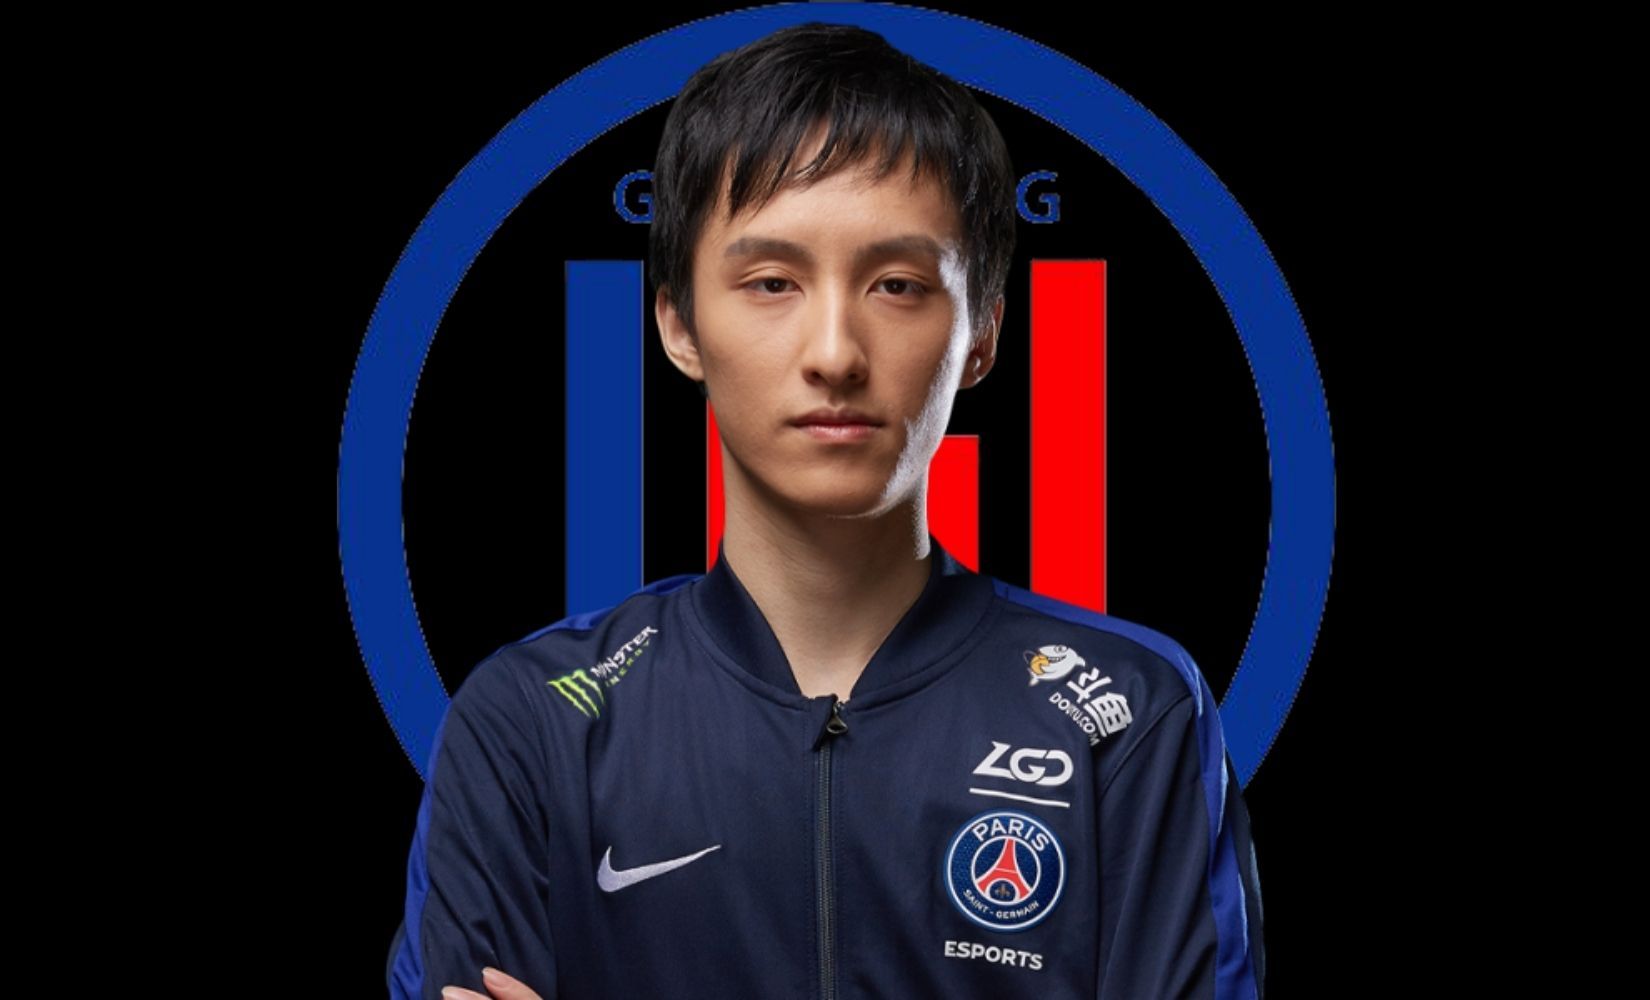 PSG.LGD Beat 4AM In a Close Contest To Win CDA-FDC Professional Championship